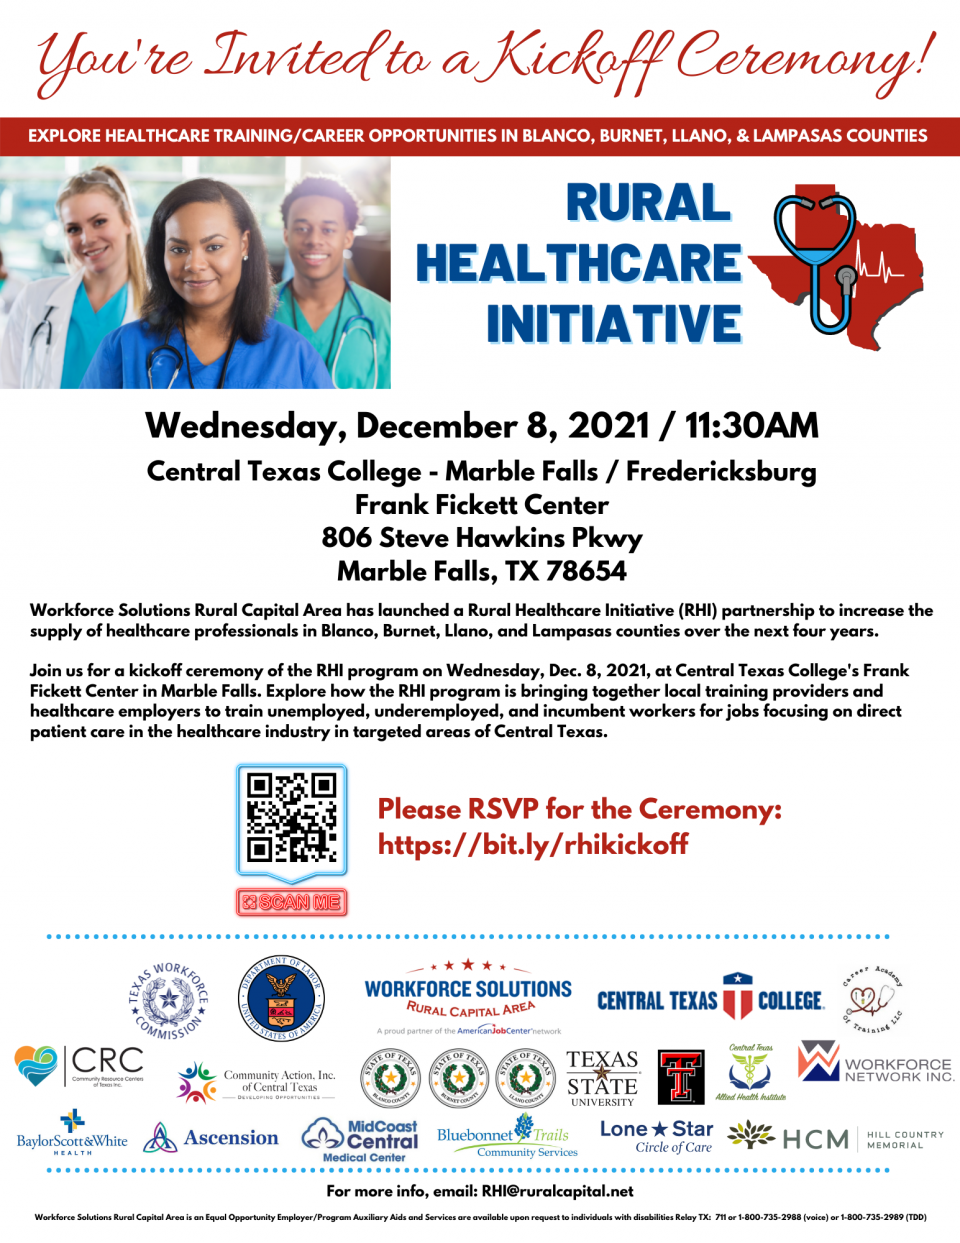 Help Celebrate Opportunity: Join Us for the Rural Healthcare Initiative Kickoff Ceremony on Dec. 8